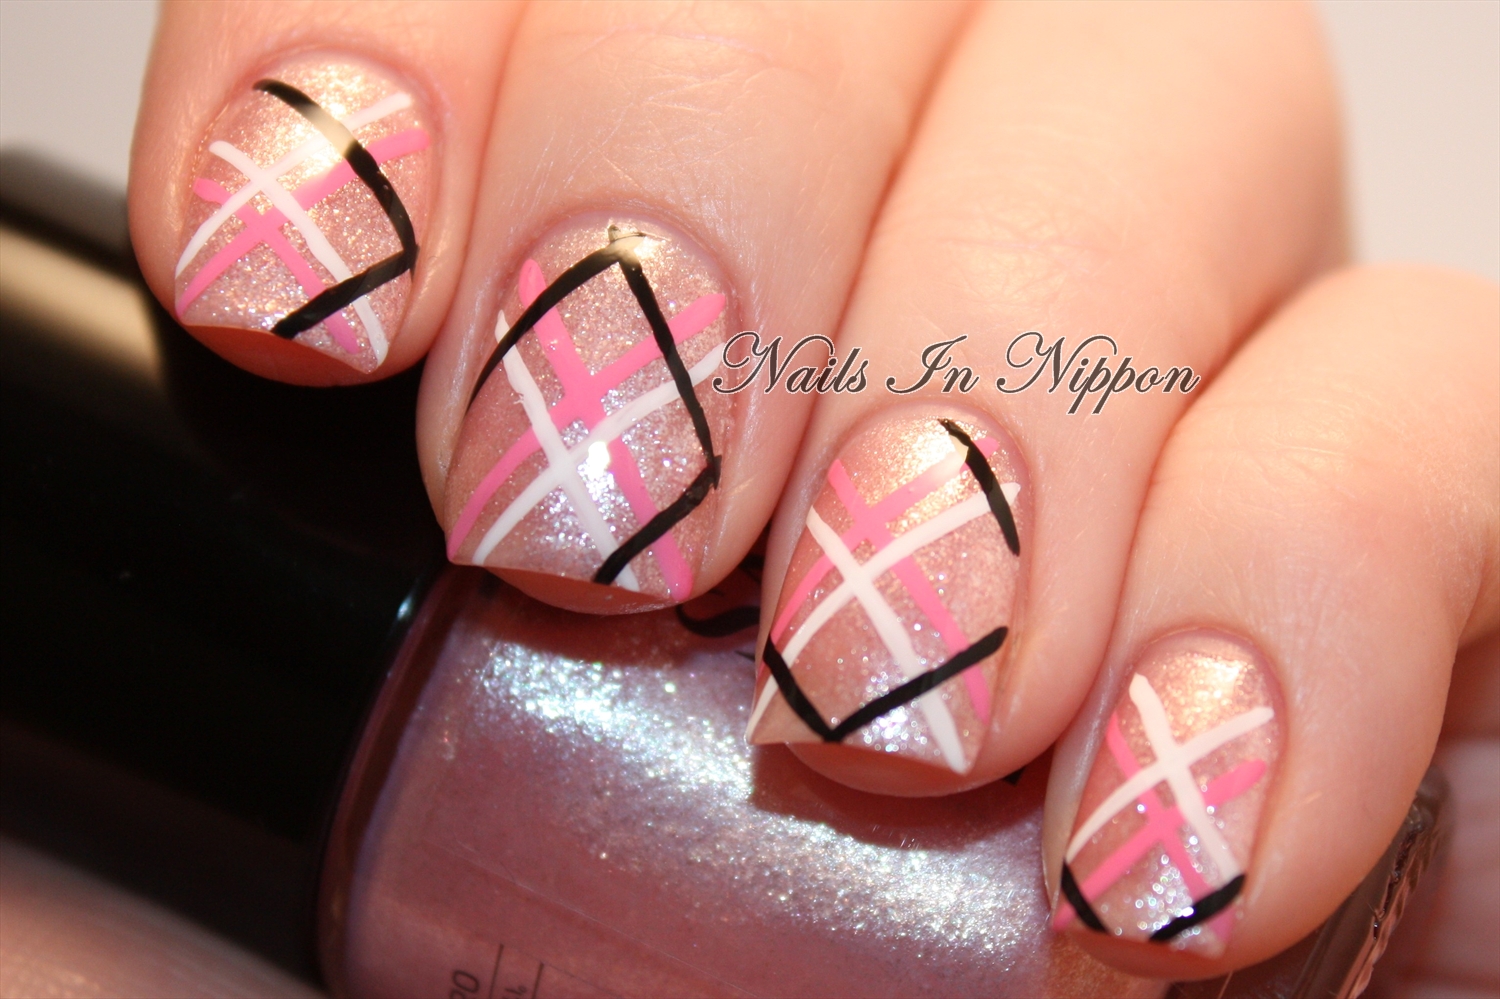 2. "Black and Pink Ombre Nail Art" - wide 5